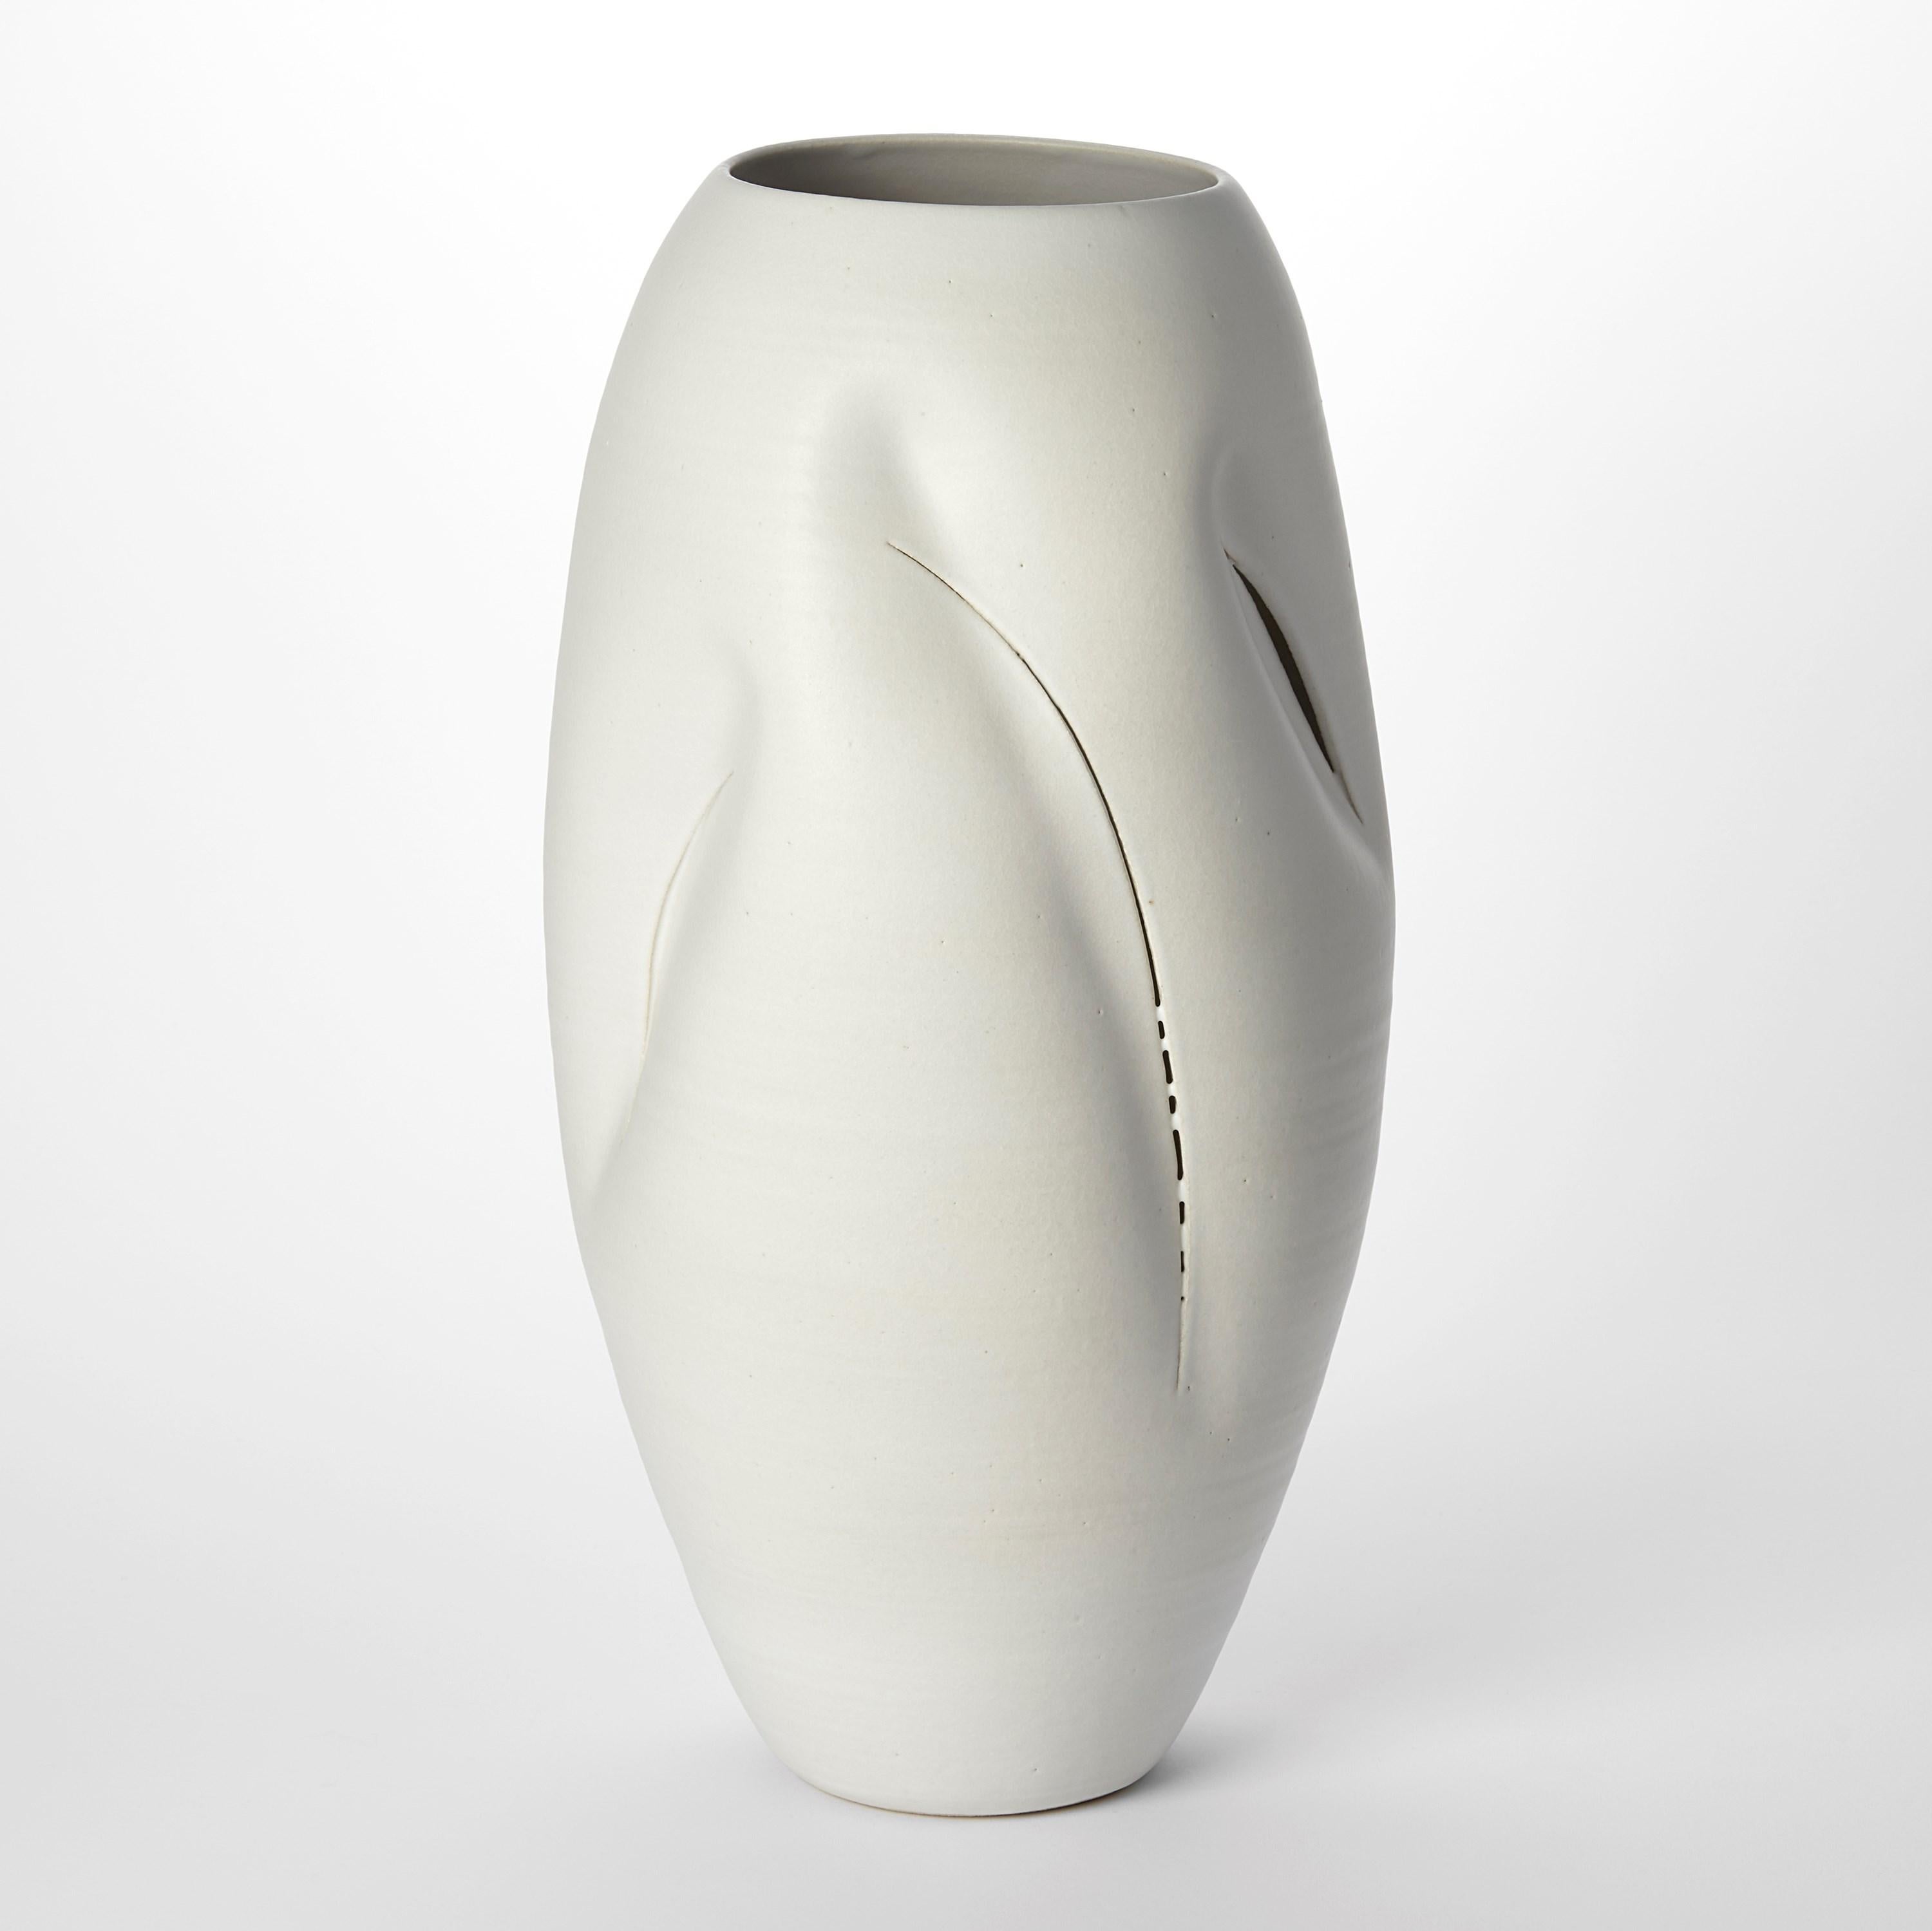 ‘Tall Multi-Slashed Form No 120’ is a unique sculptural vessel by the British artist, Nicholas Arroyave-Portela.

Nicholas Arroyave-Portela’s professional ceramic practise began in 1994. After 20 years based in London, he moved and set up his studio